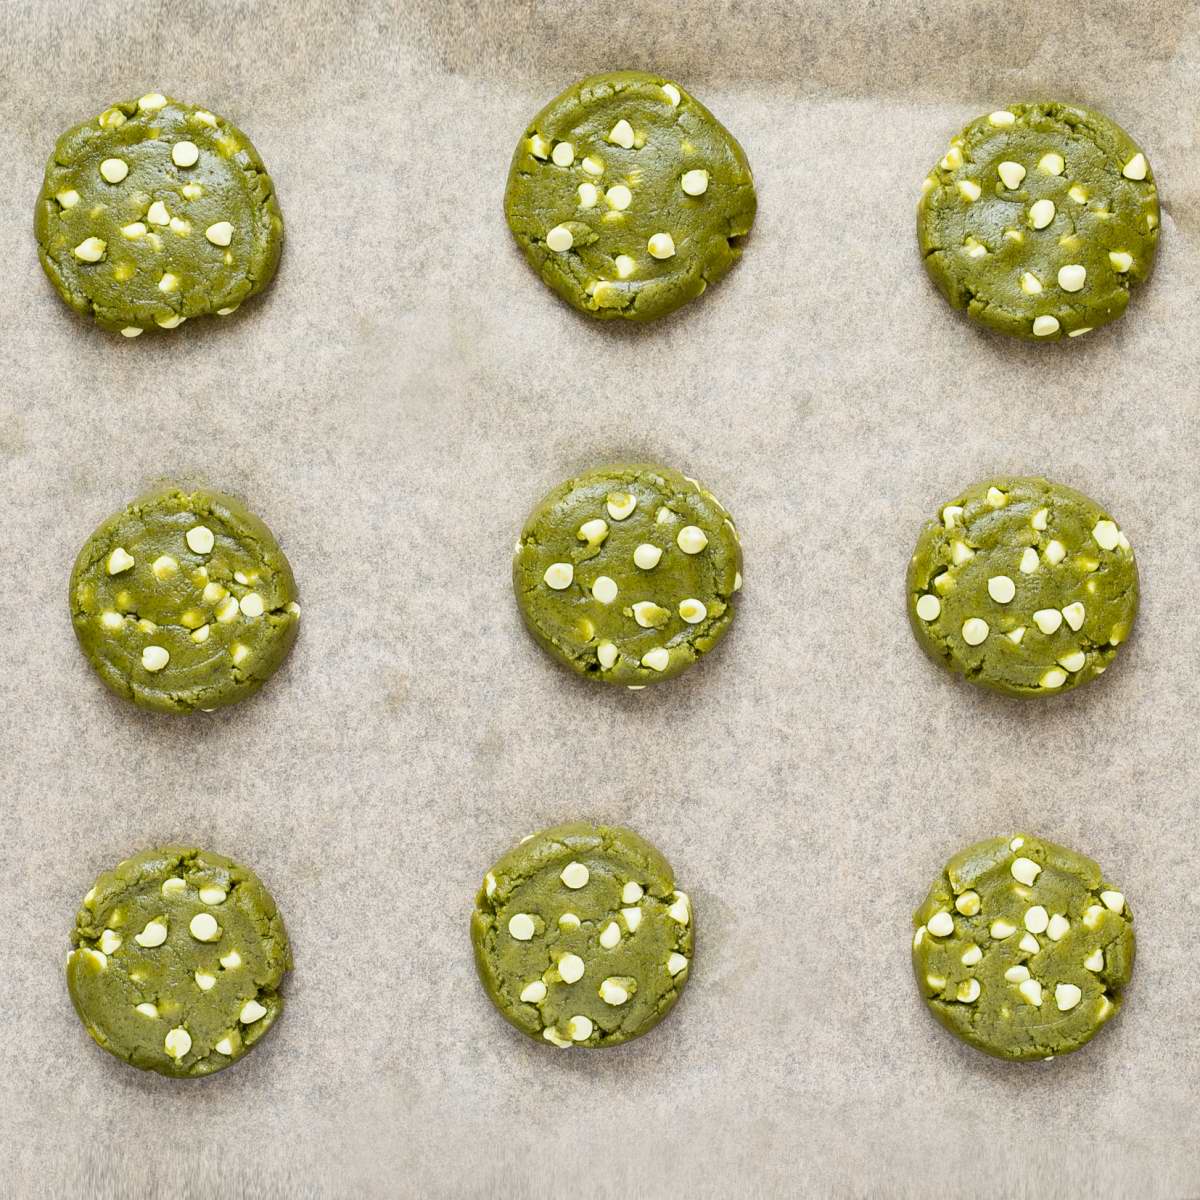 Unbaked round vibrant green cookie batters with white chocolate chips on parchment paper neatly placed away from each other.